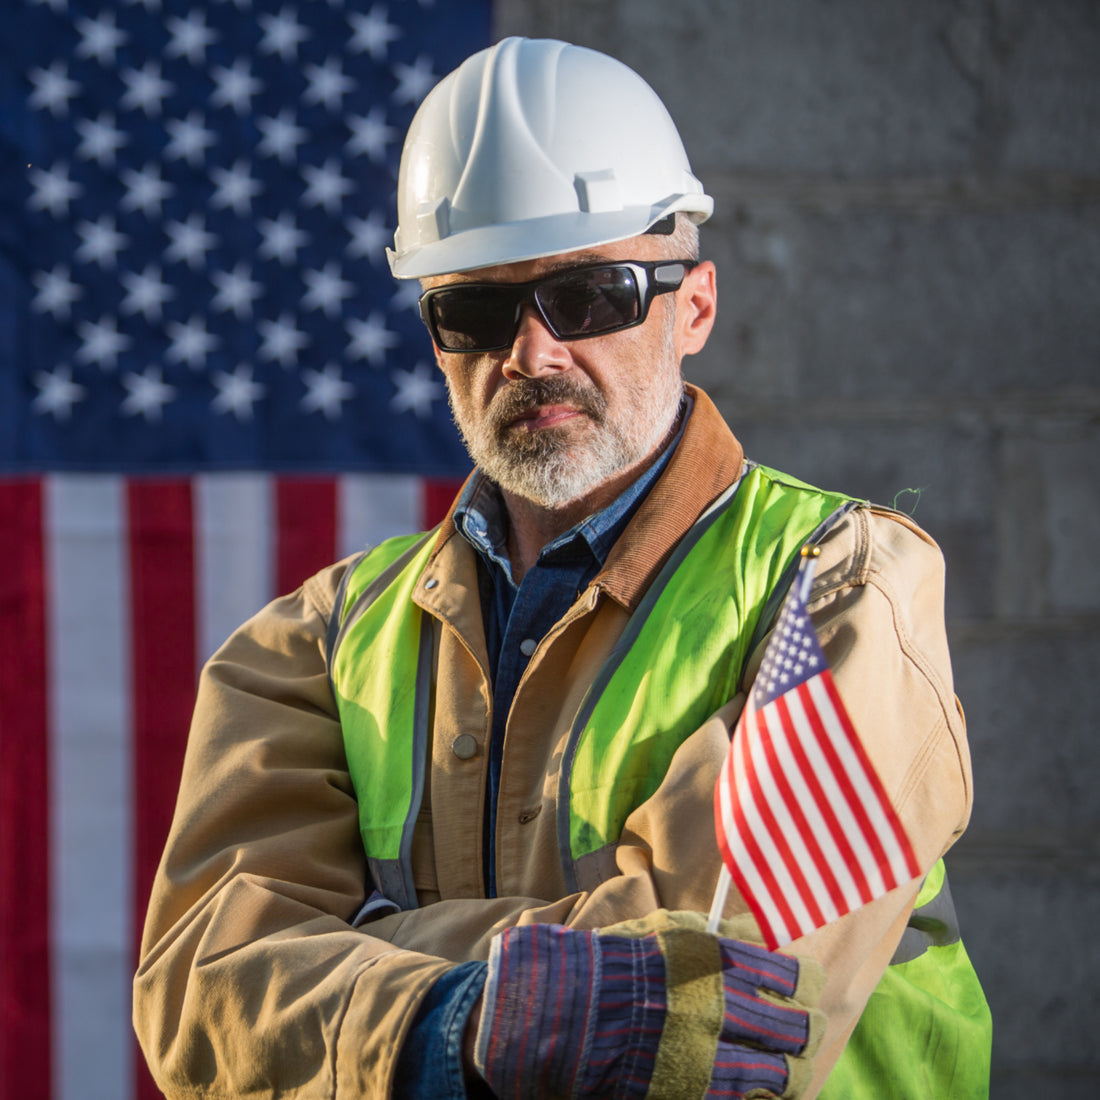 Worker holding an American flag celebrating labor day